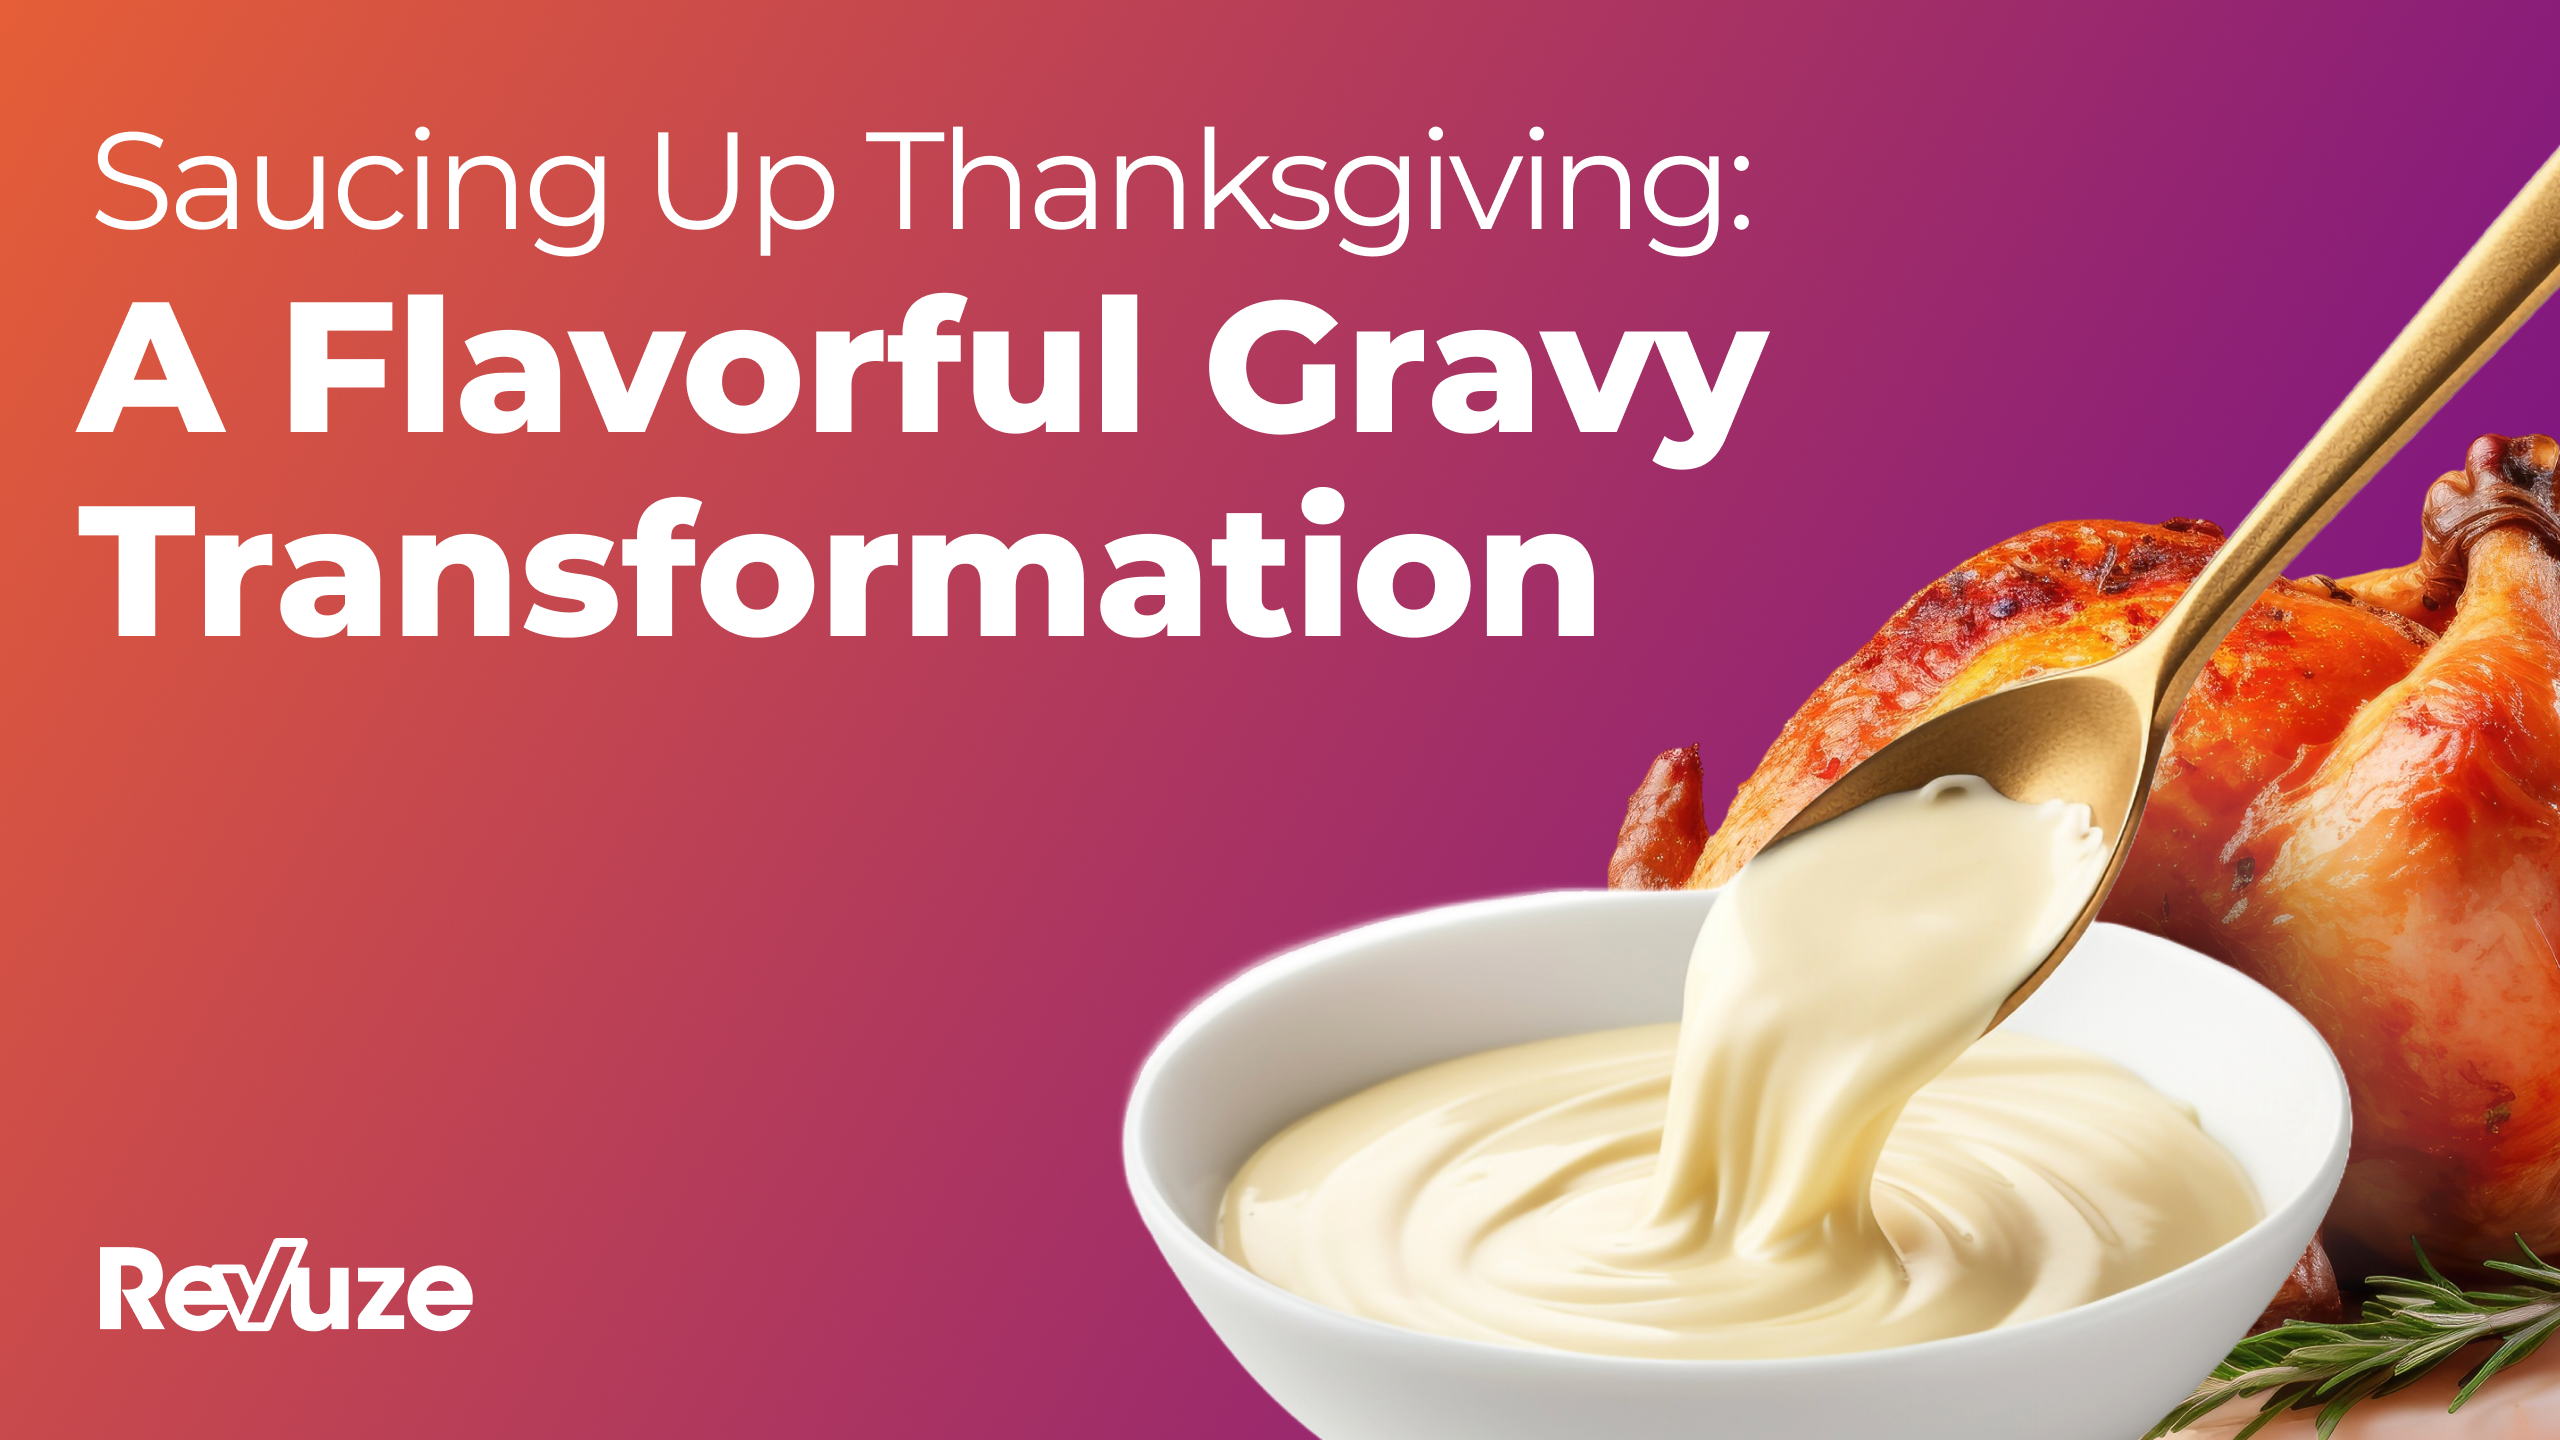 Saucing Up Thanksgiving: A Flavorful Gravy Transformation